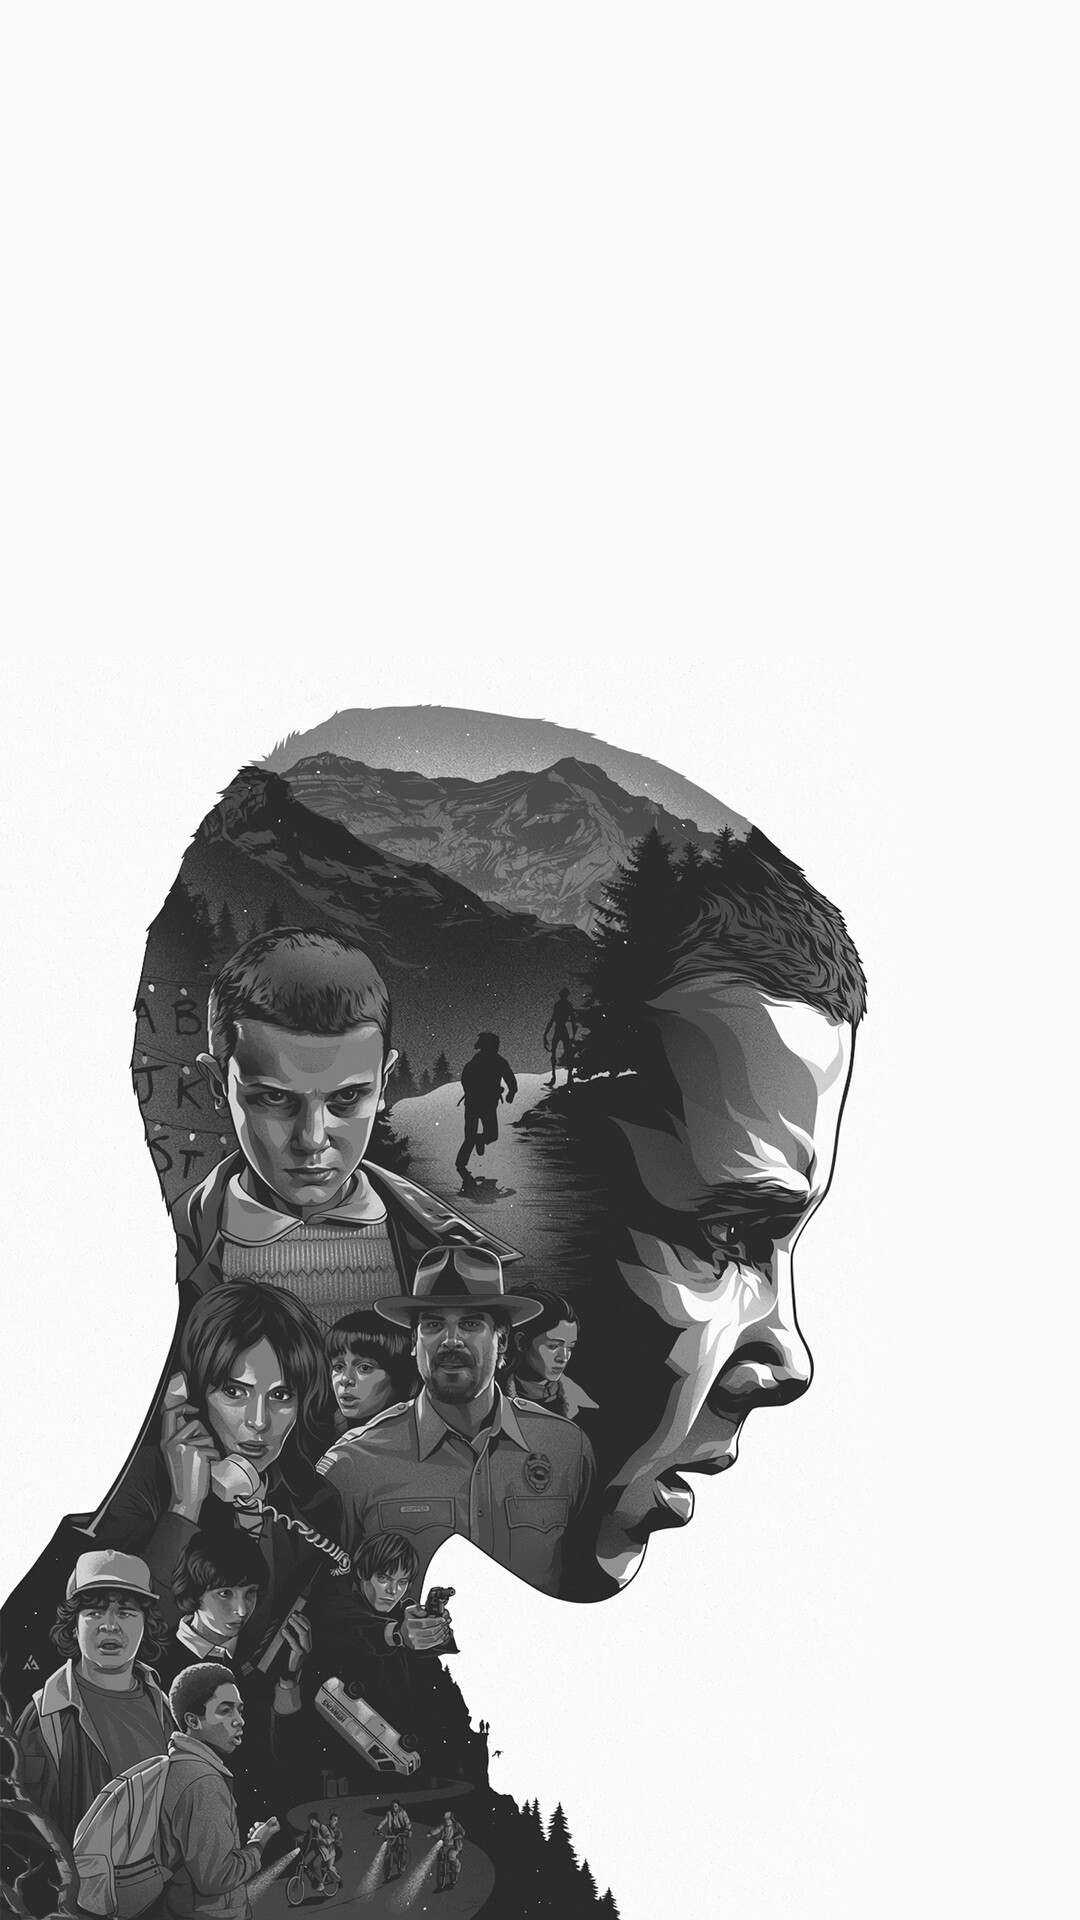 Stranger Things: Black and white, A Netflix original series created by the Duffer Brothers. 1080x1920 Full HD Background.